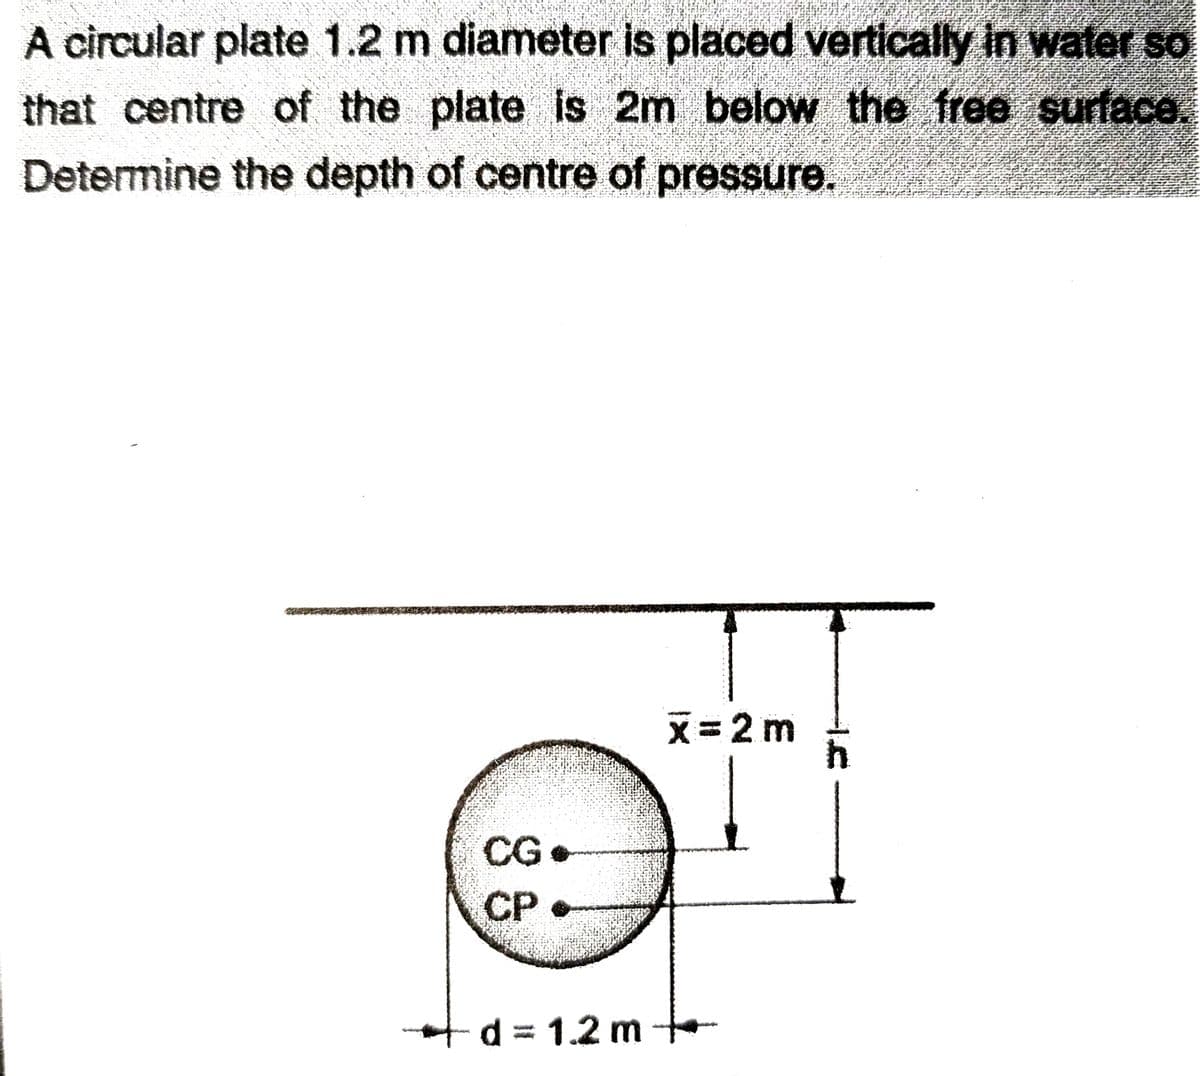 A circular plate 1.2 m diameter is placed vertically In water so
that centre of the plate Is 2m below the free surface.
Determine the depth of centre of pressure.
X=2 m
CG•
СР
+d= 1.2 m
